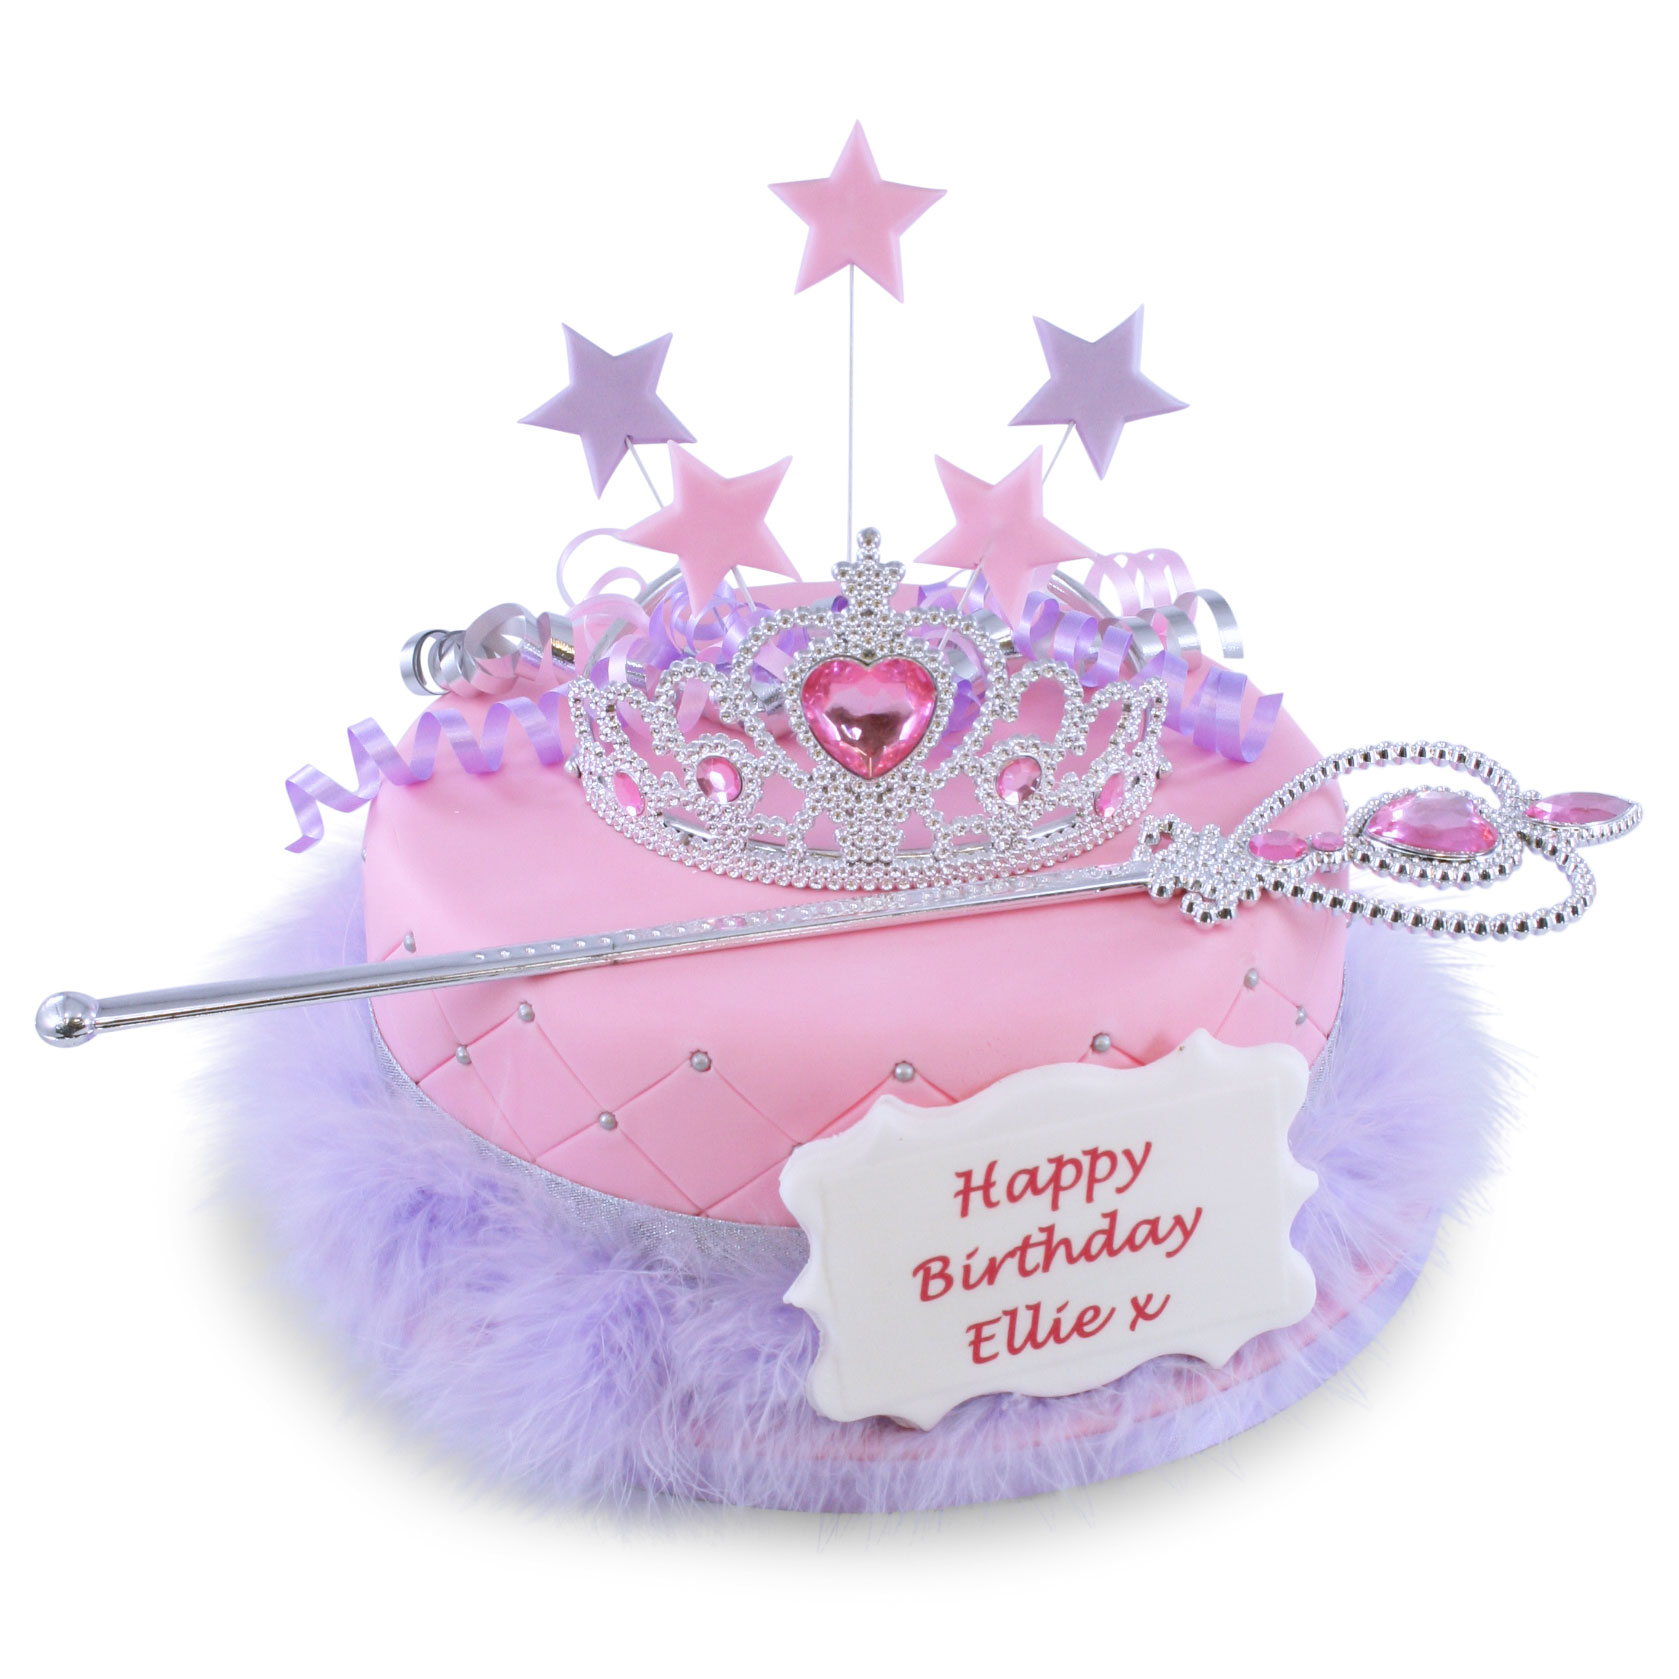 Princess Pink Crown Pearl Cake | Promo Cakes in Singapore – Blissful Moon  Bakery